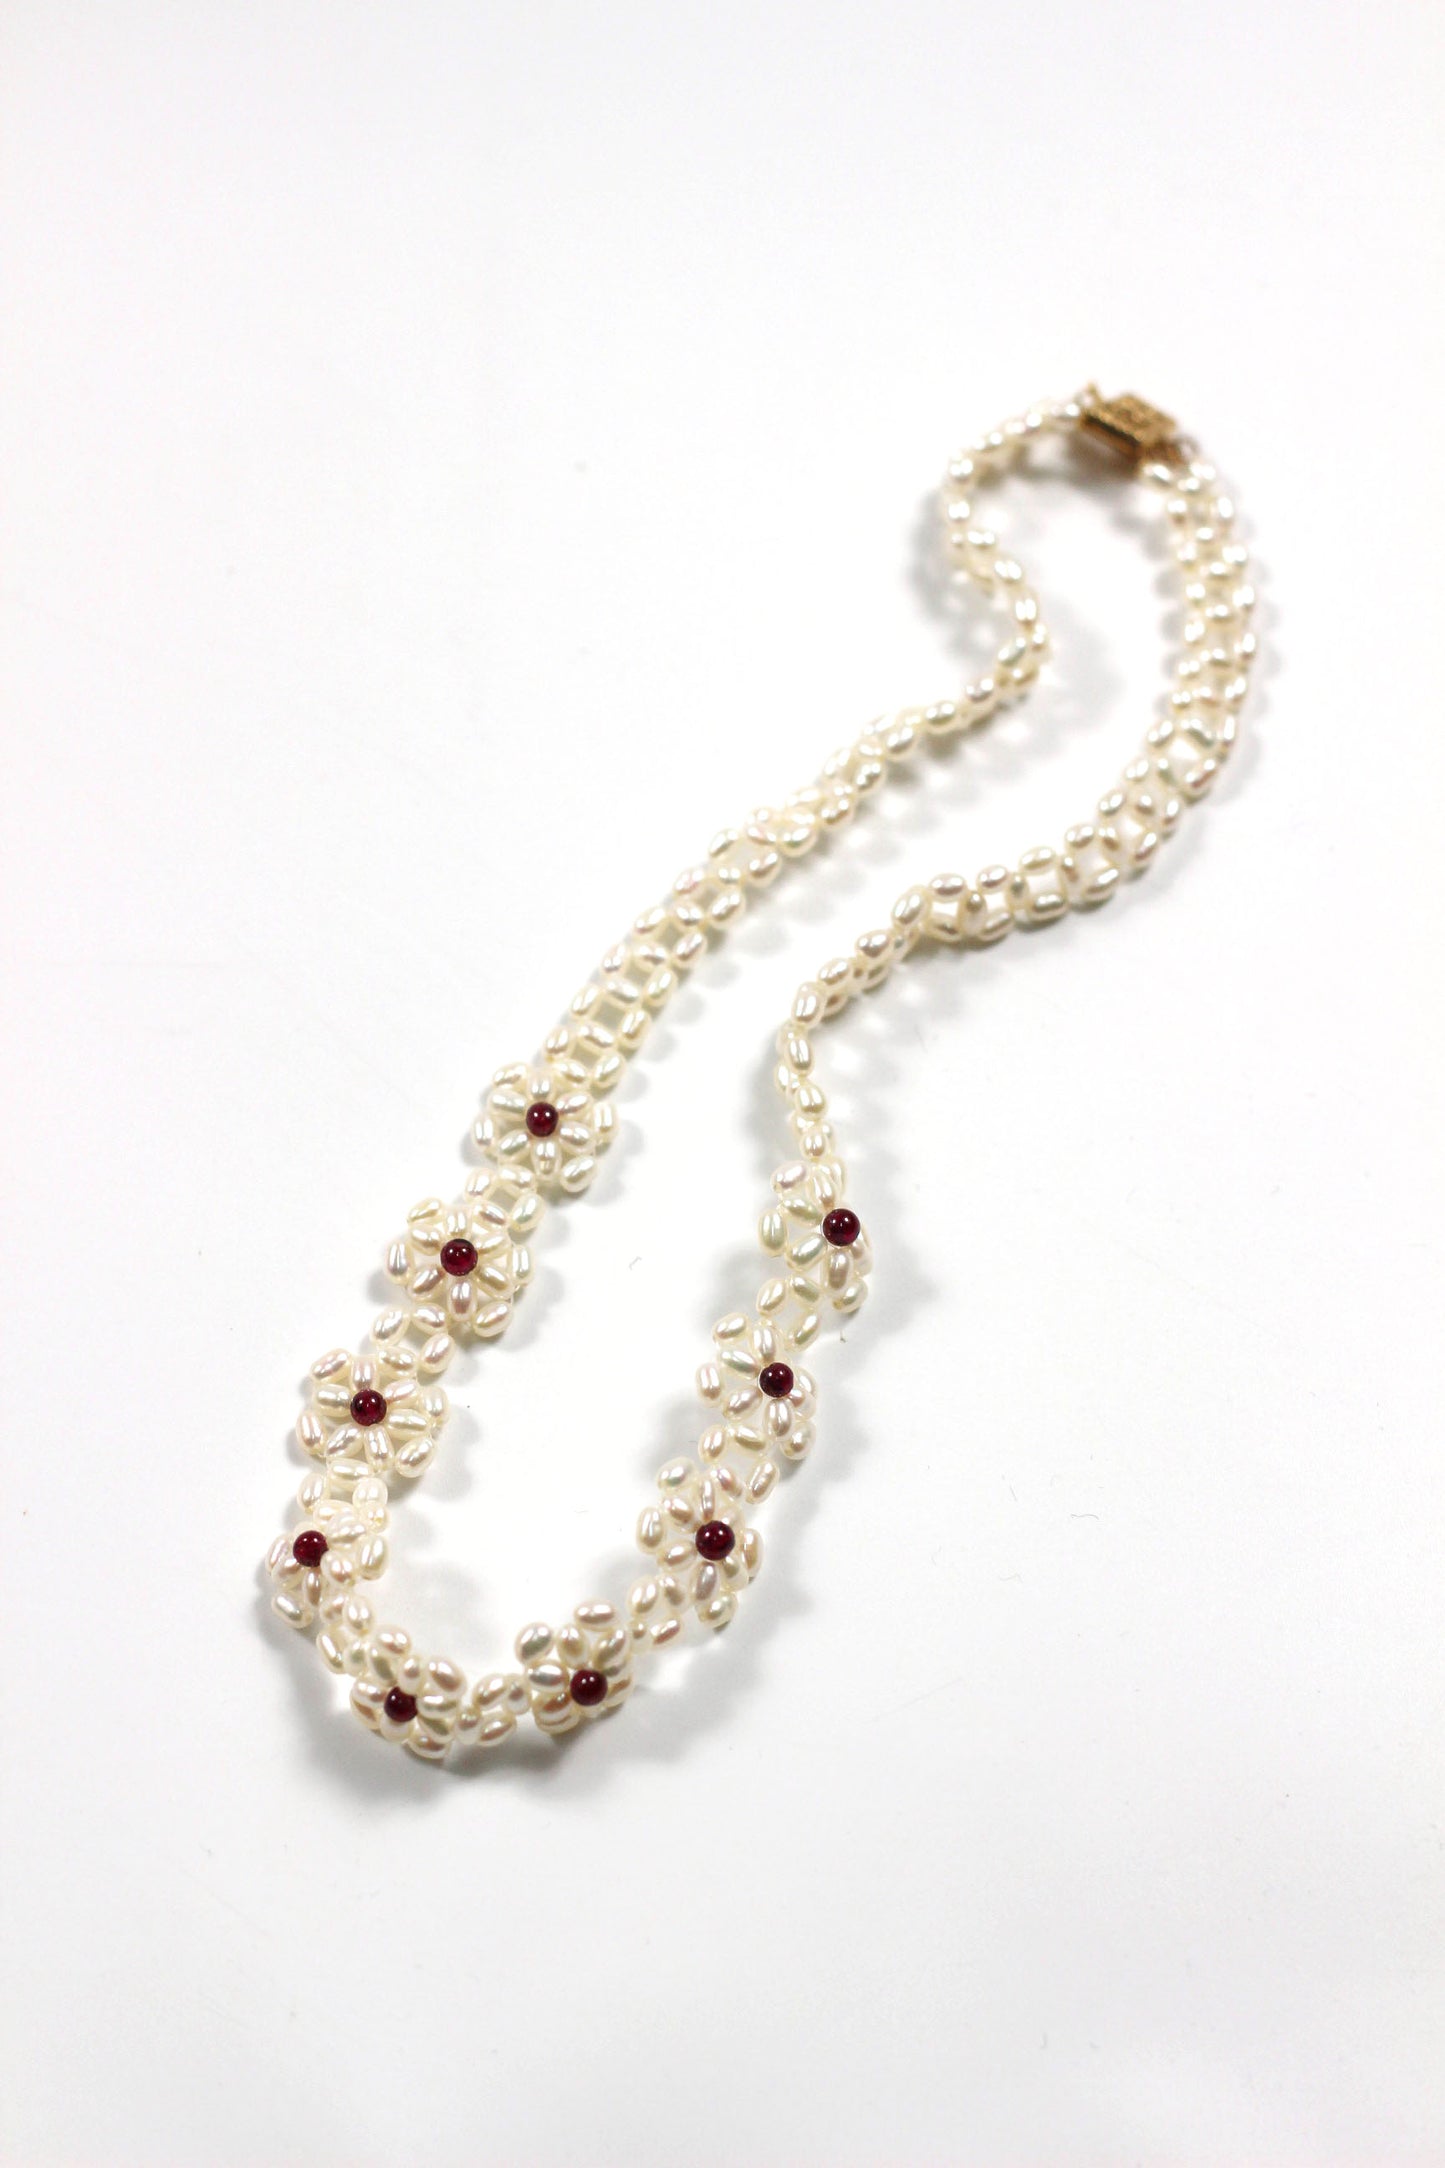 Vintage white beads flower necklace 白雪の花